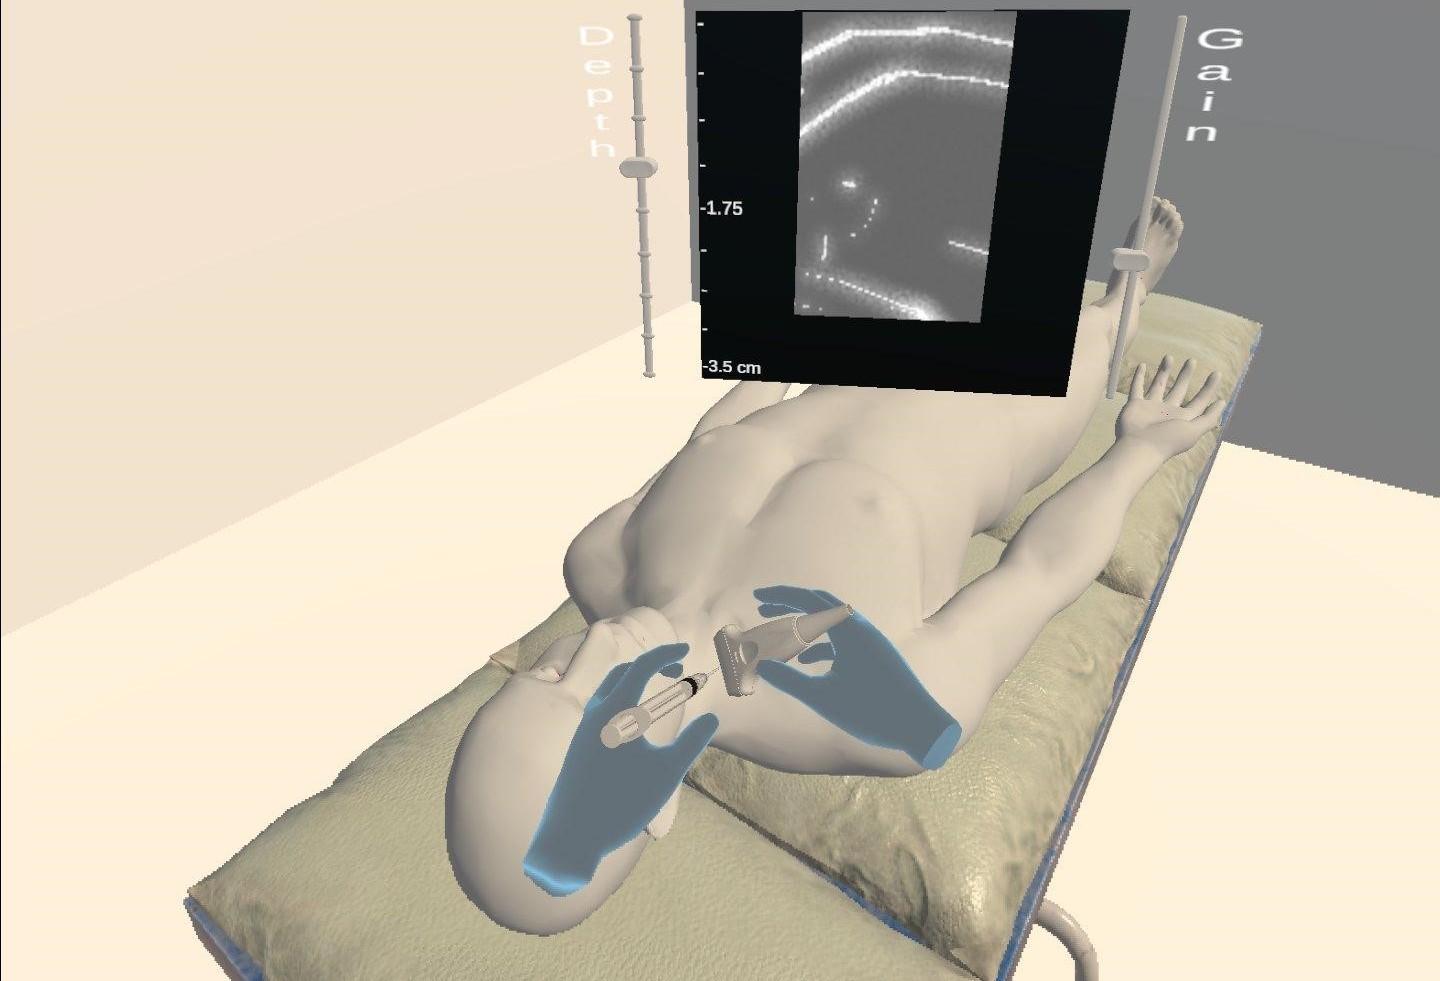 virtual patient on a hospital bed, as seen through a virtual reality headset